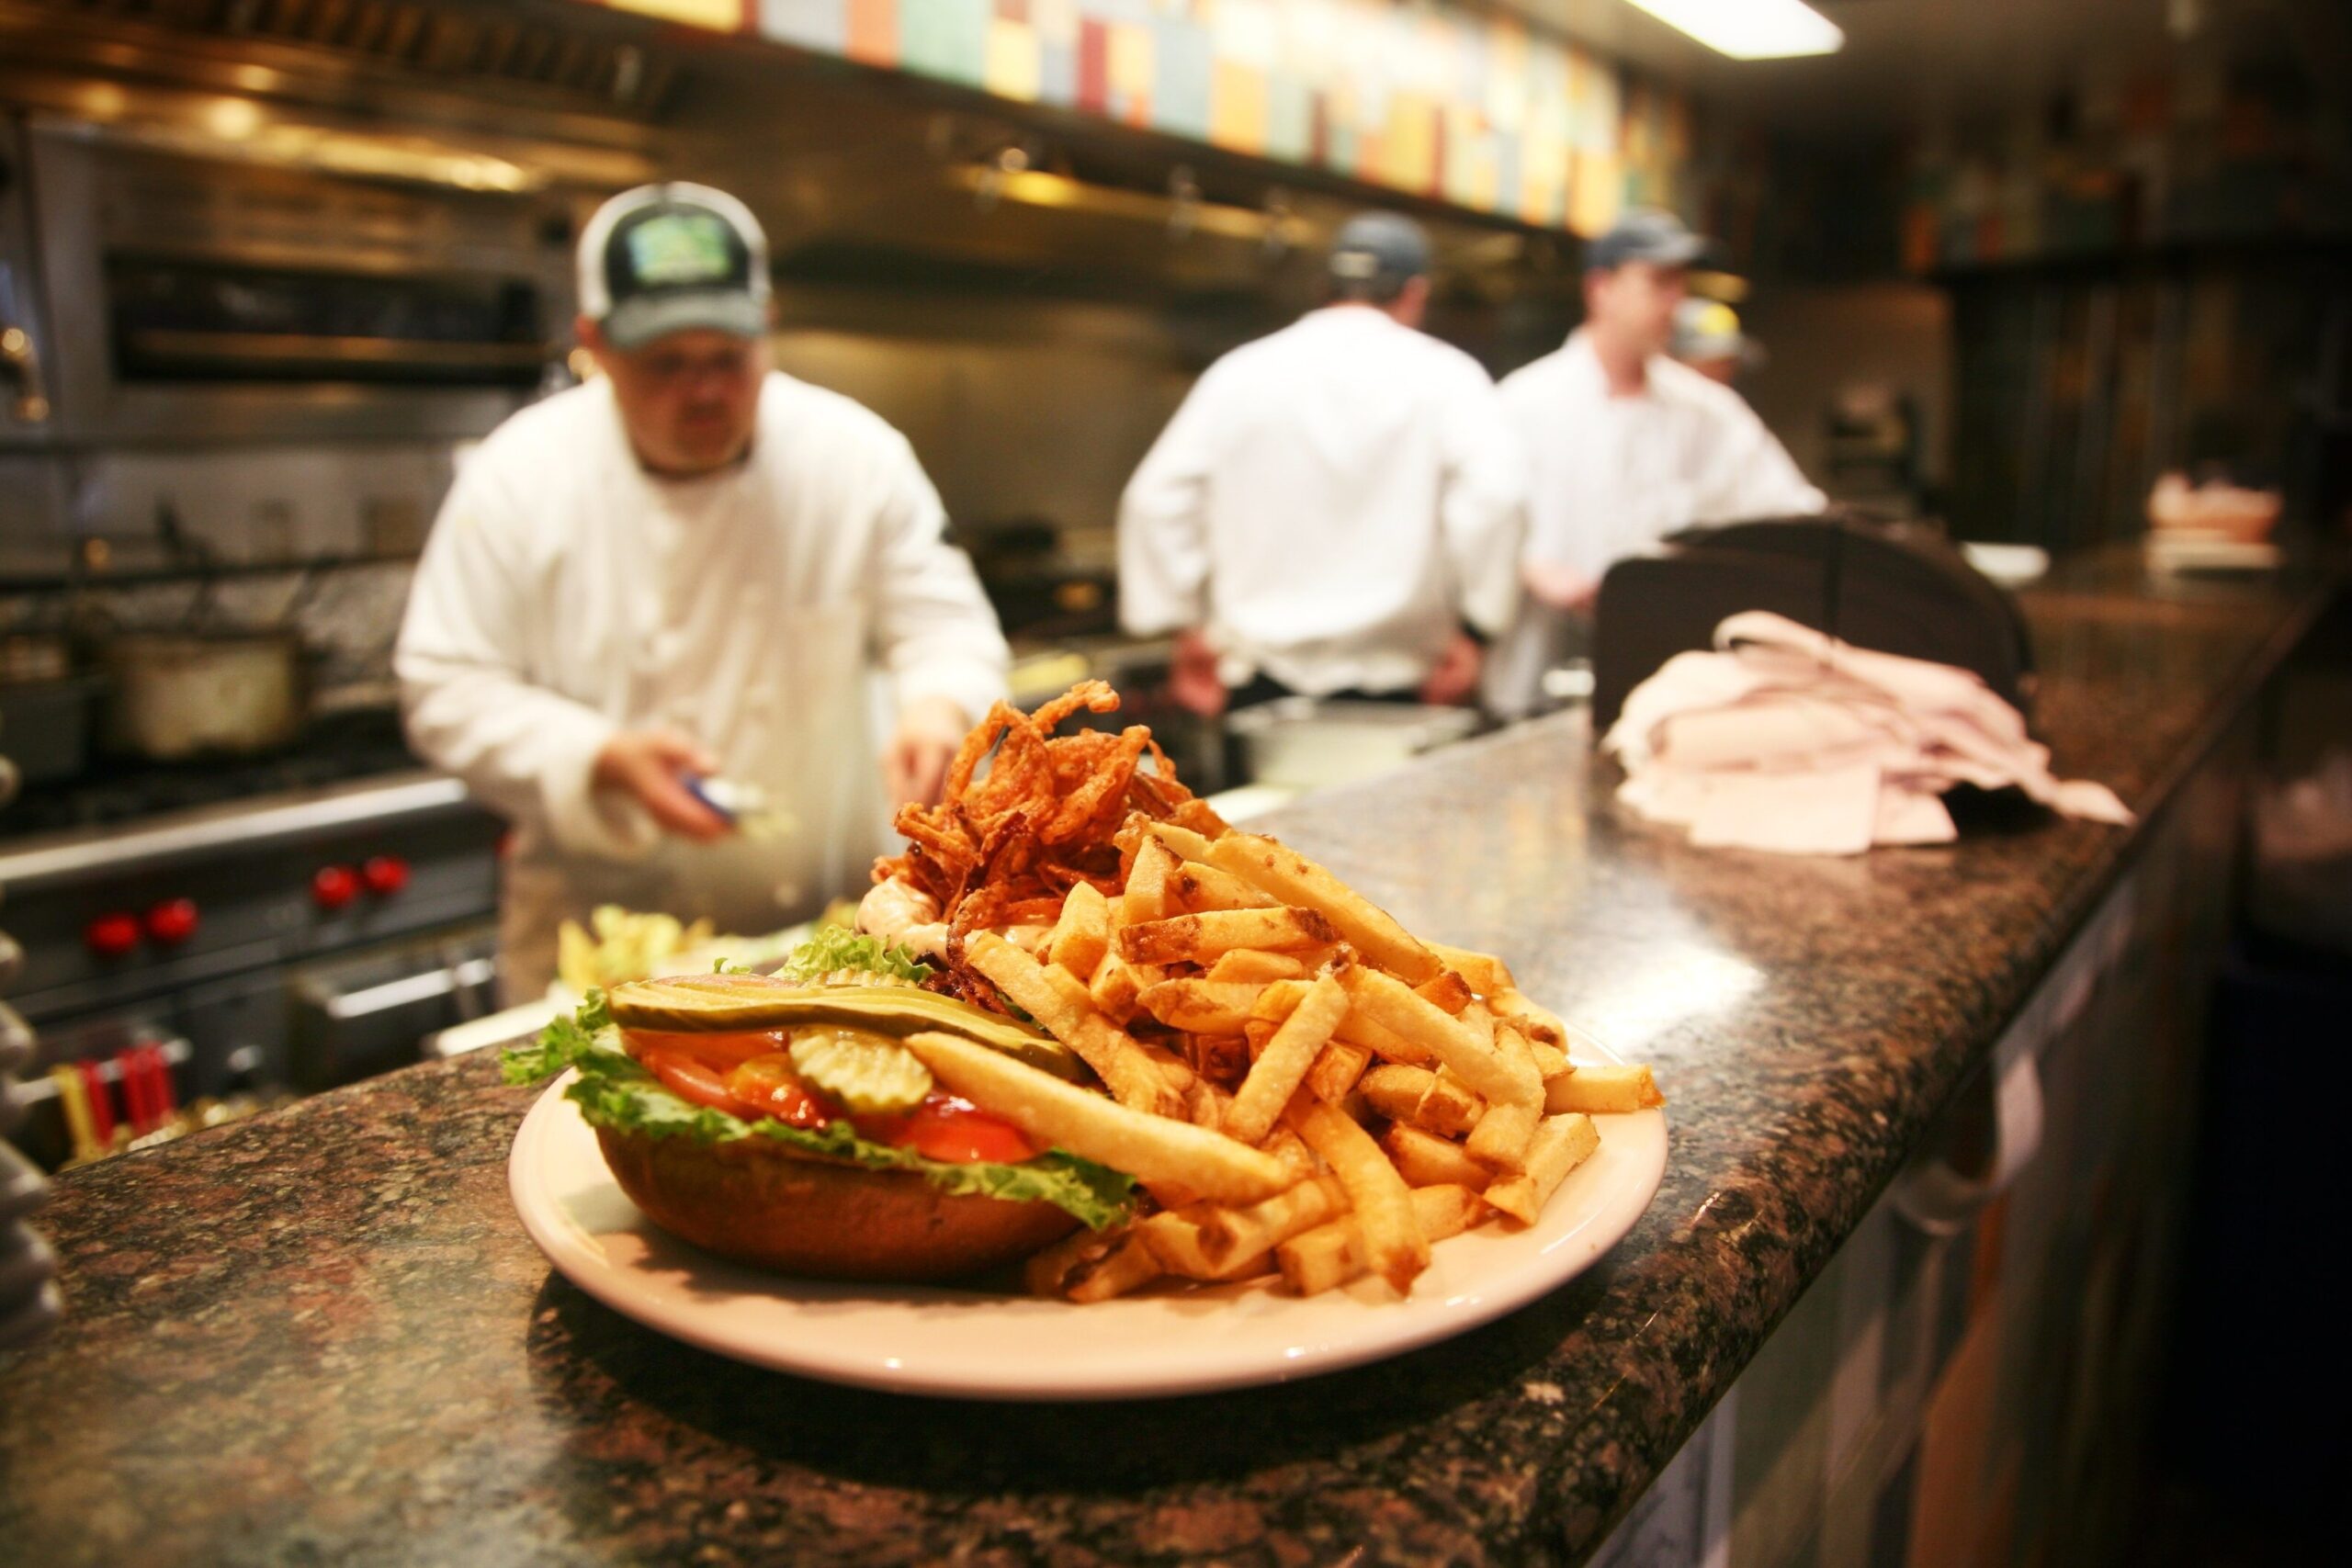 Plate of hamburger and fries in restaurant kitchen